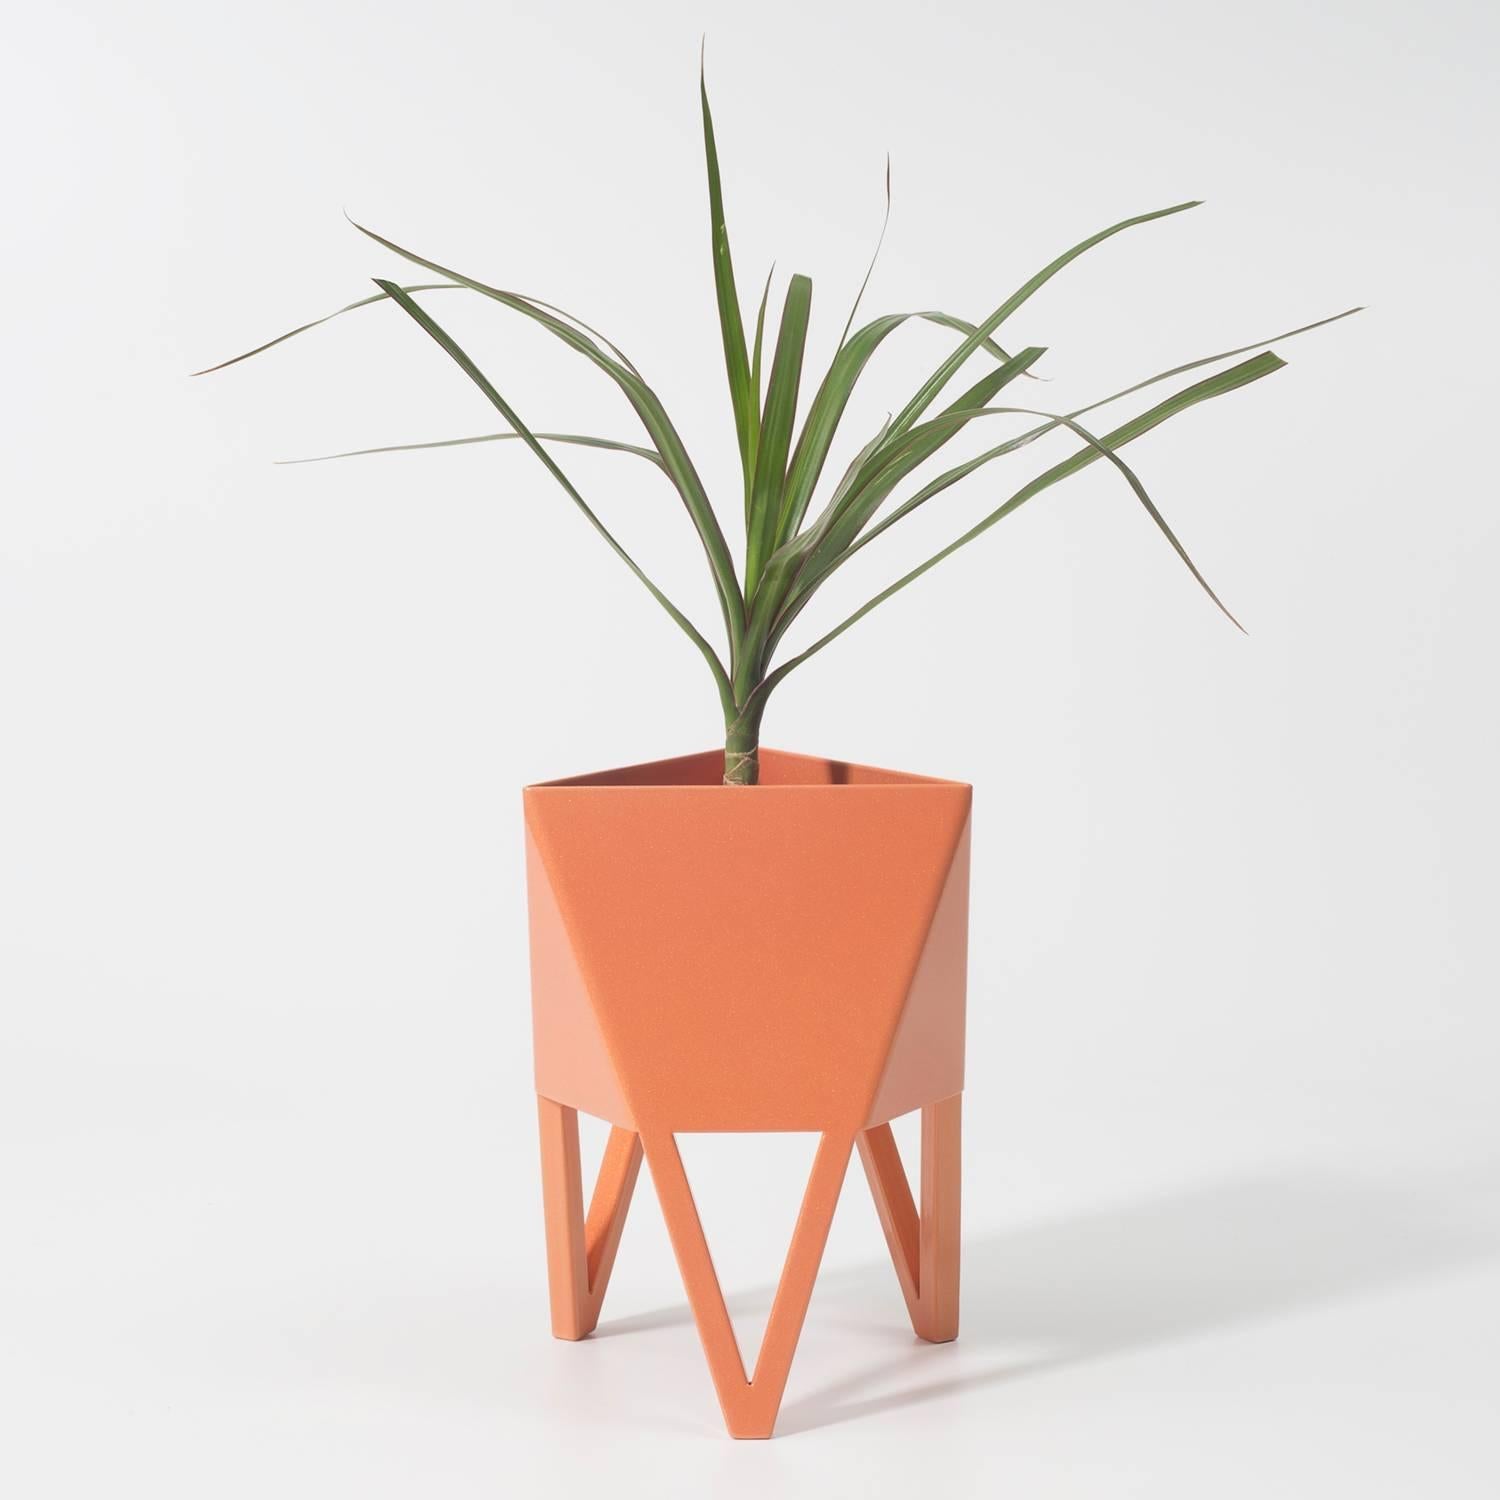 Deca Planter in Pastel Green Steel, Large, by Force/Collide 3